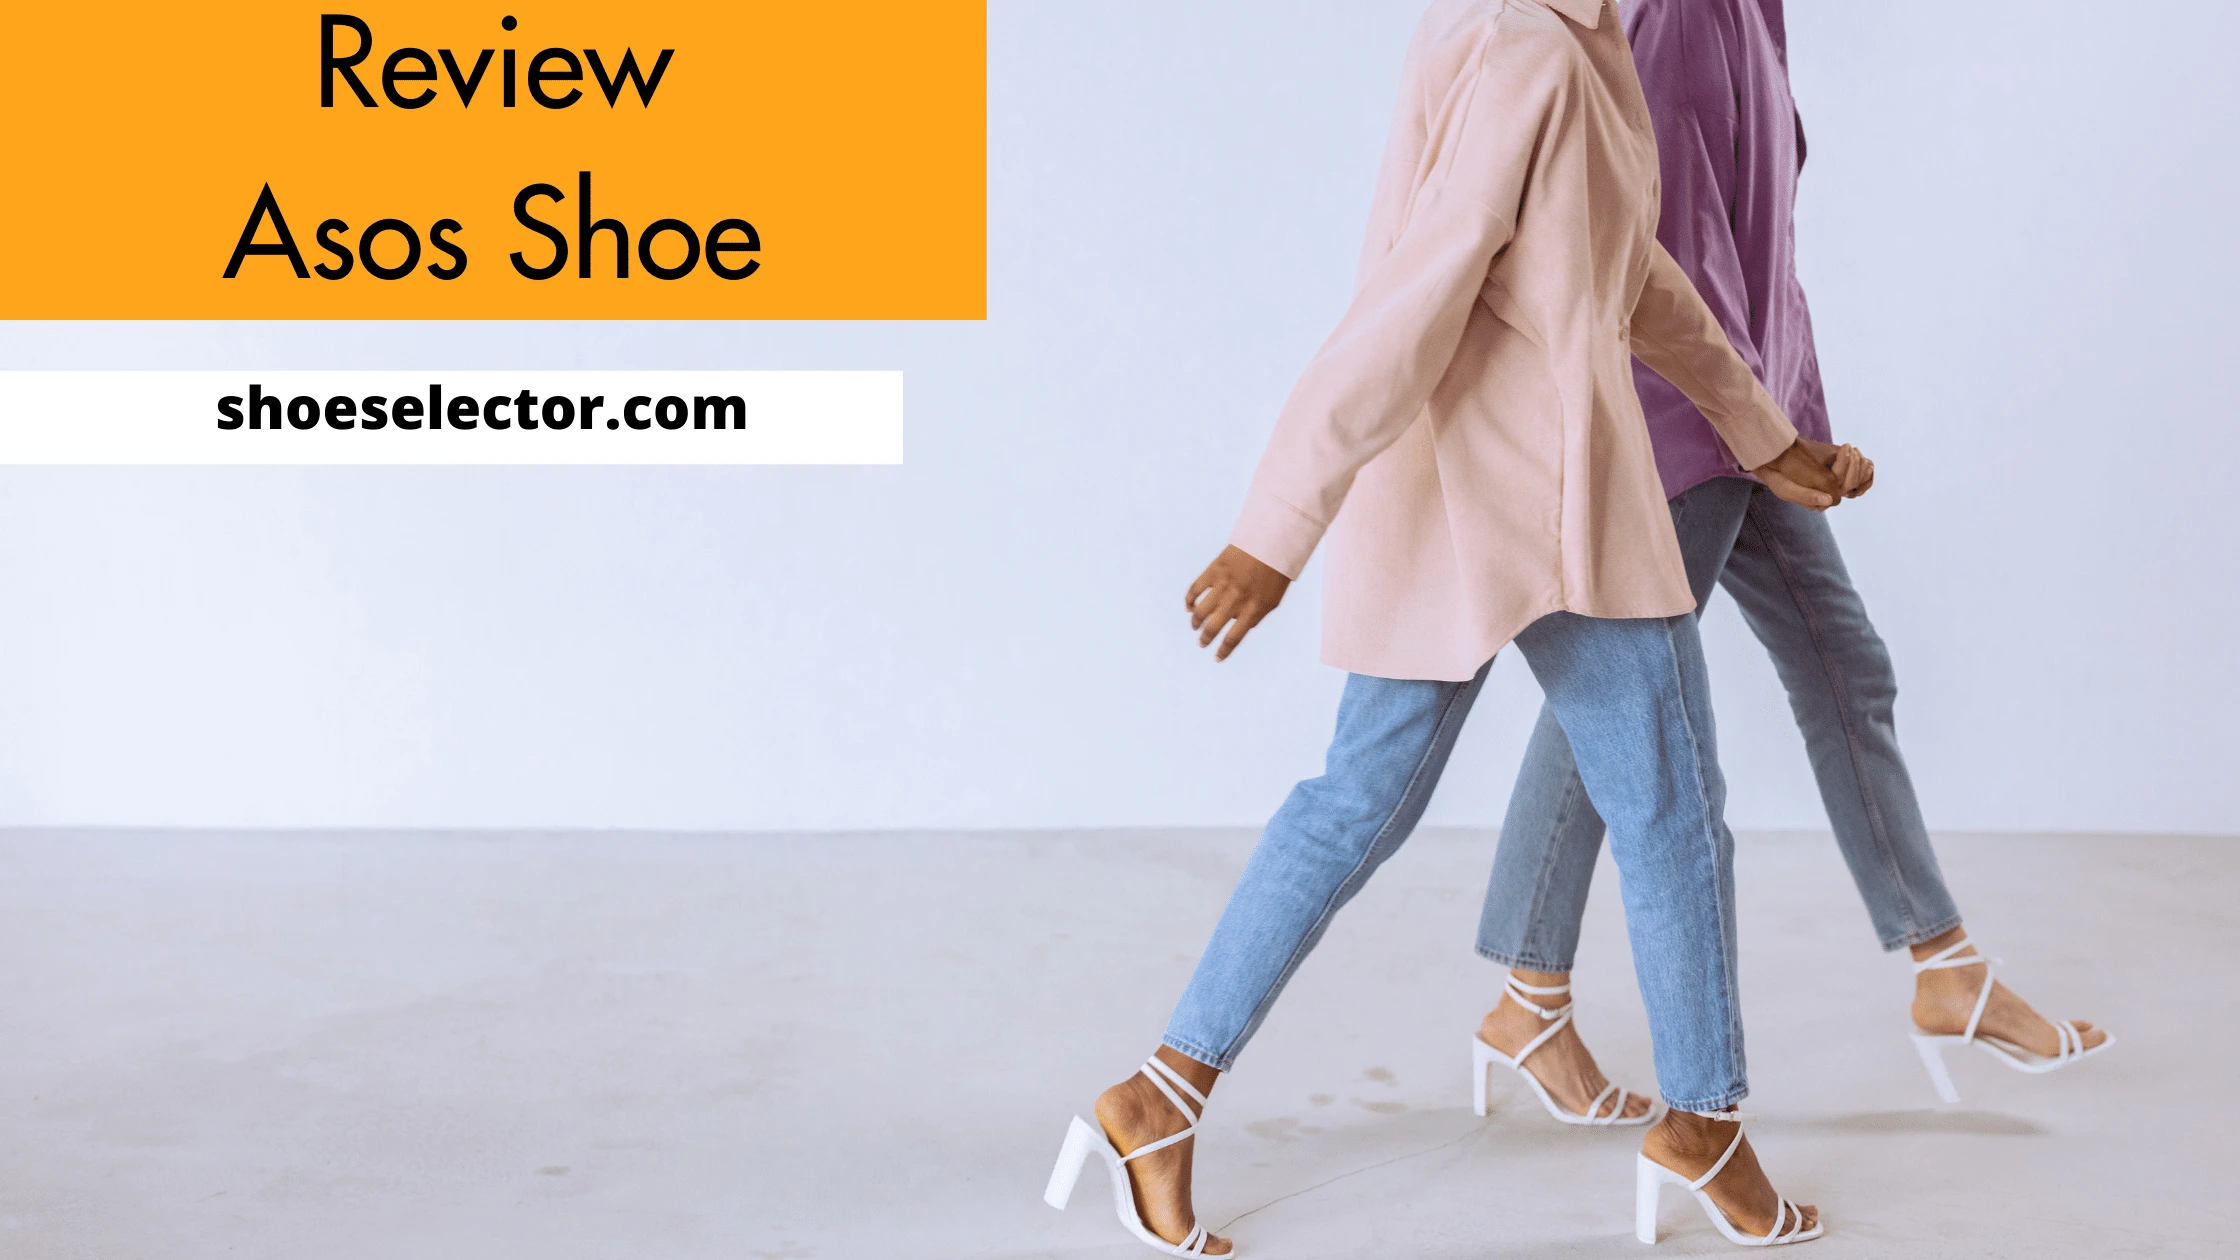 Asos Shoe Review With - Expert Choice